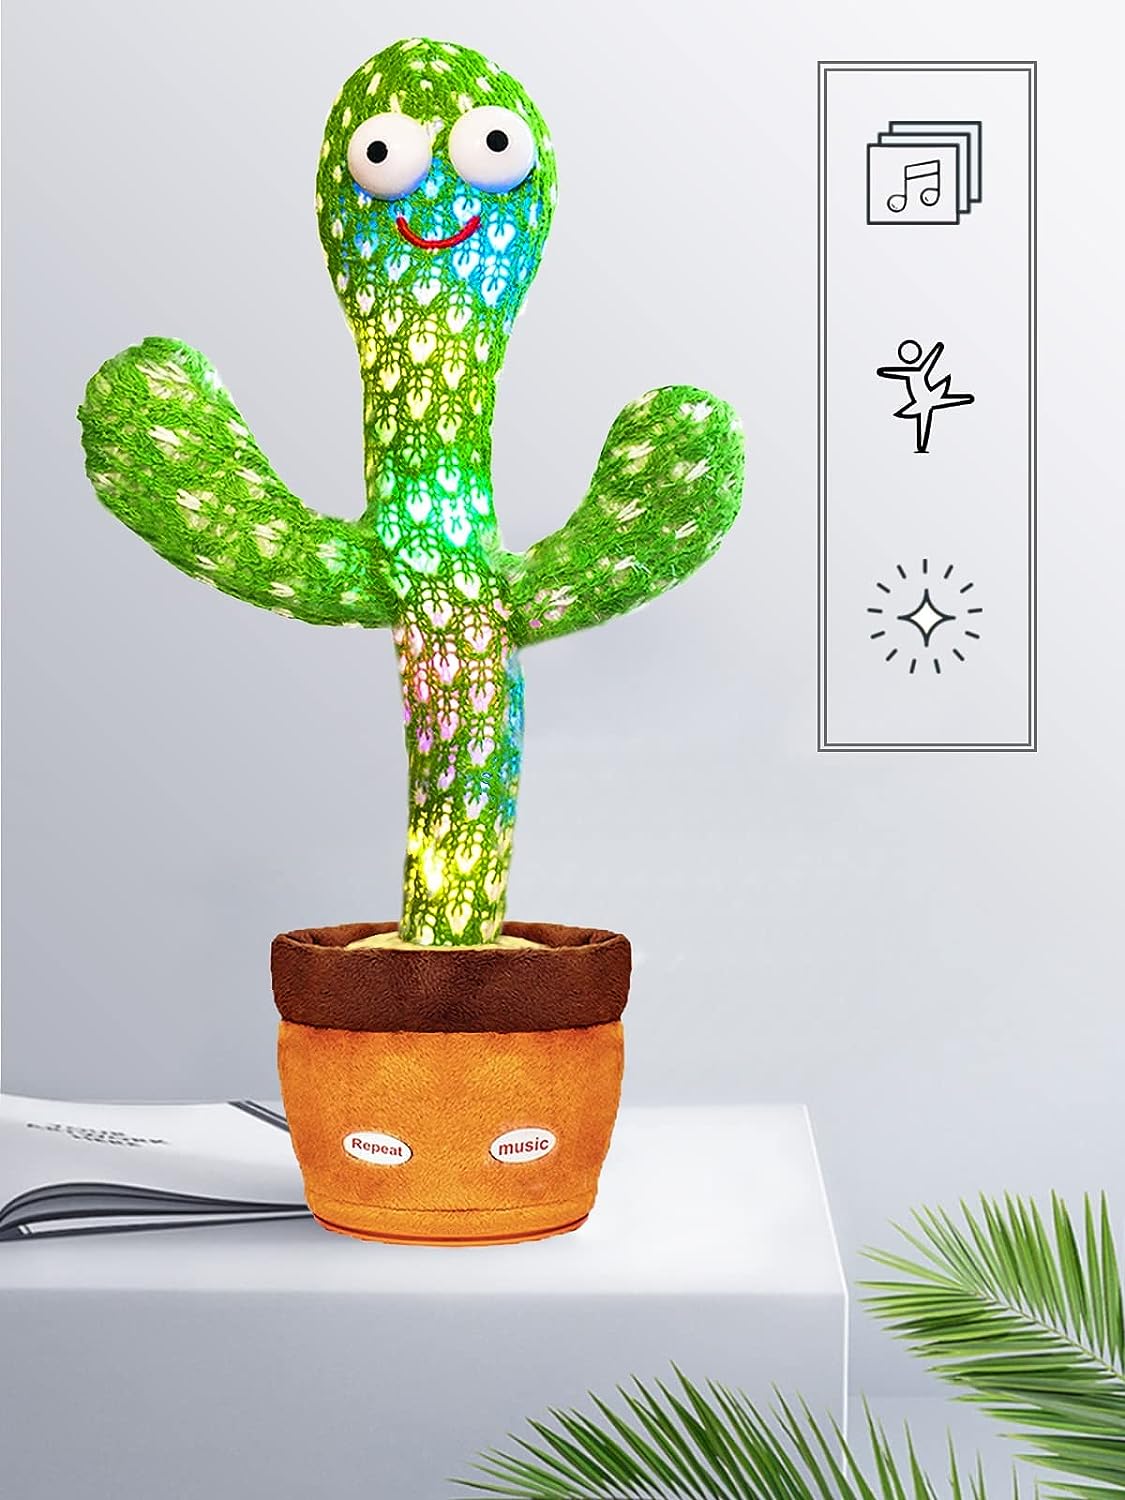 Keculf Dancing Talking Cactus Baby Mimicking Toys with LED 120 English Songs, Singing Musical Toy, Tummy Time Toy Mimic Repeats What You Say (Audio Recording & Retelling)